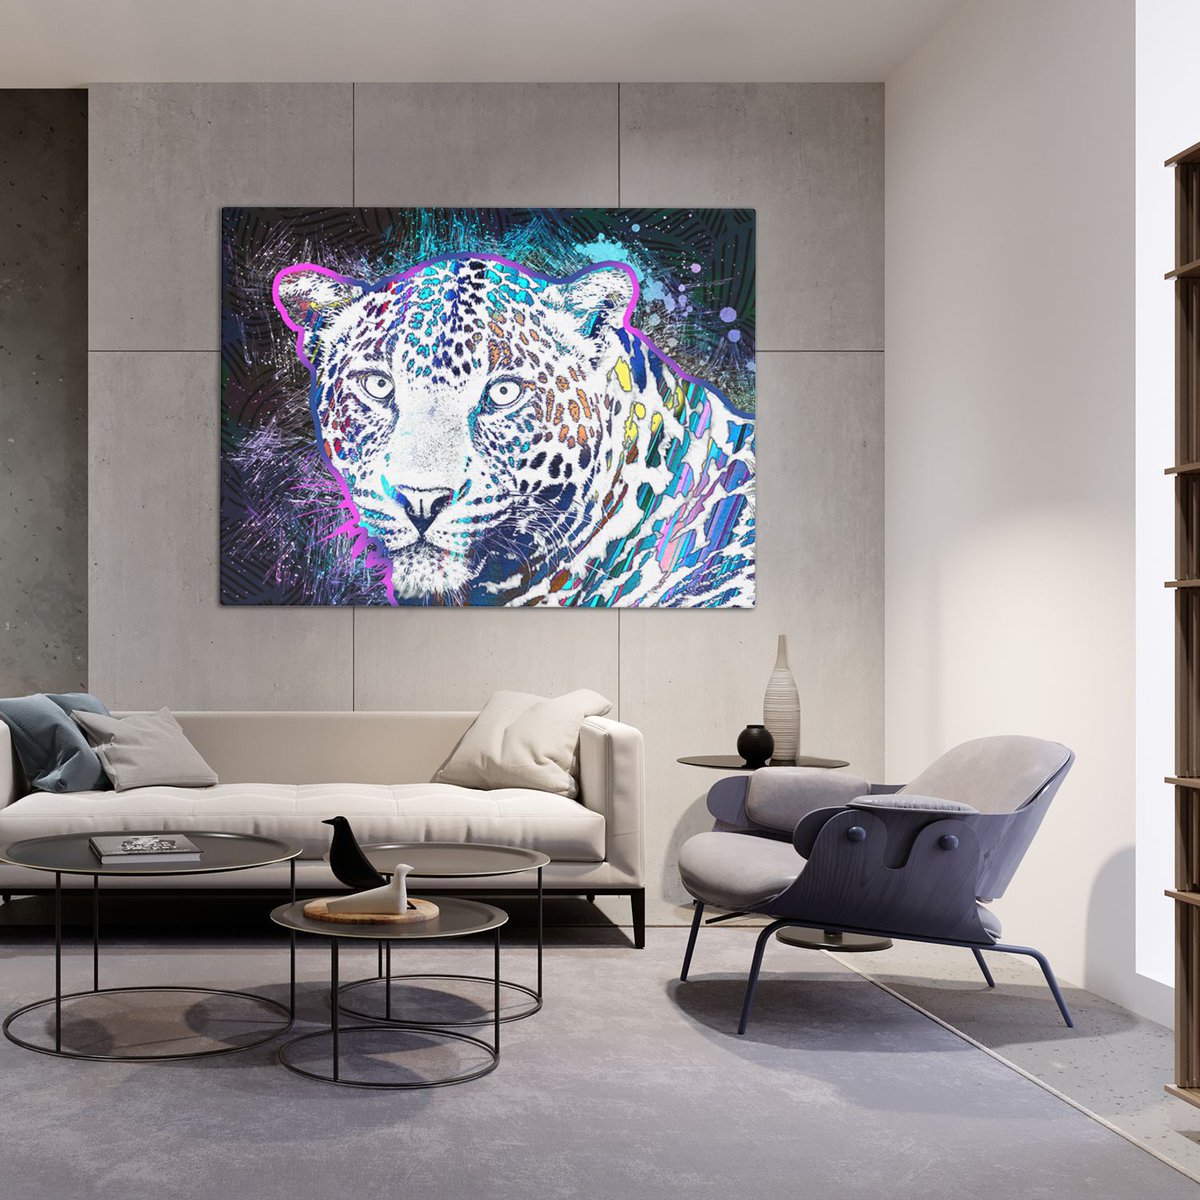 Wild leopard canvas art for sale! 🎨 Transform your space with this stunning masterpiece.
.
.
.
#popart #popartist #popartstyle #leopard #animallovers #catart #wildcats #multicolor #art #artist #artwork #painting #paintings #framedart #splatterart #acrylicpainting #oilpainting